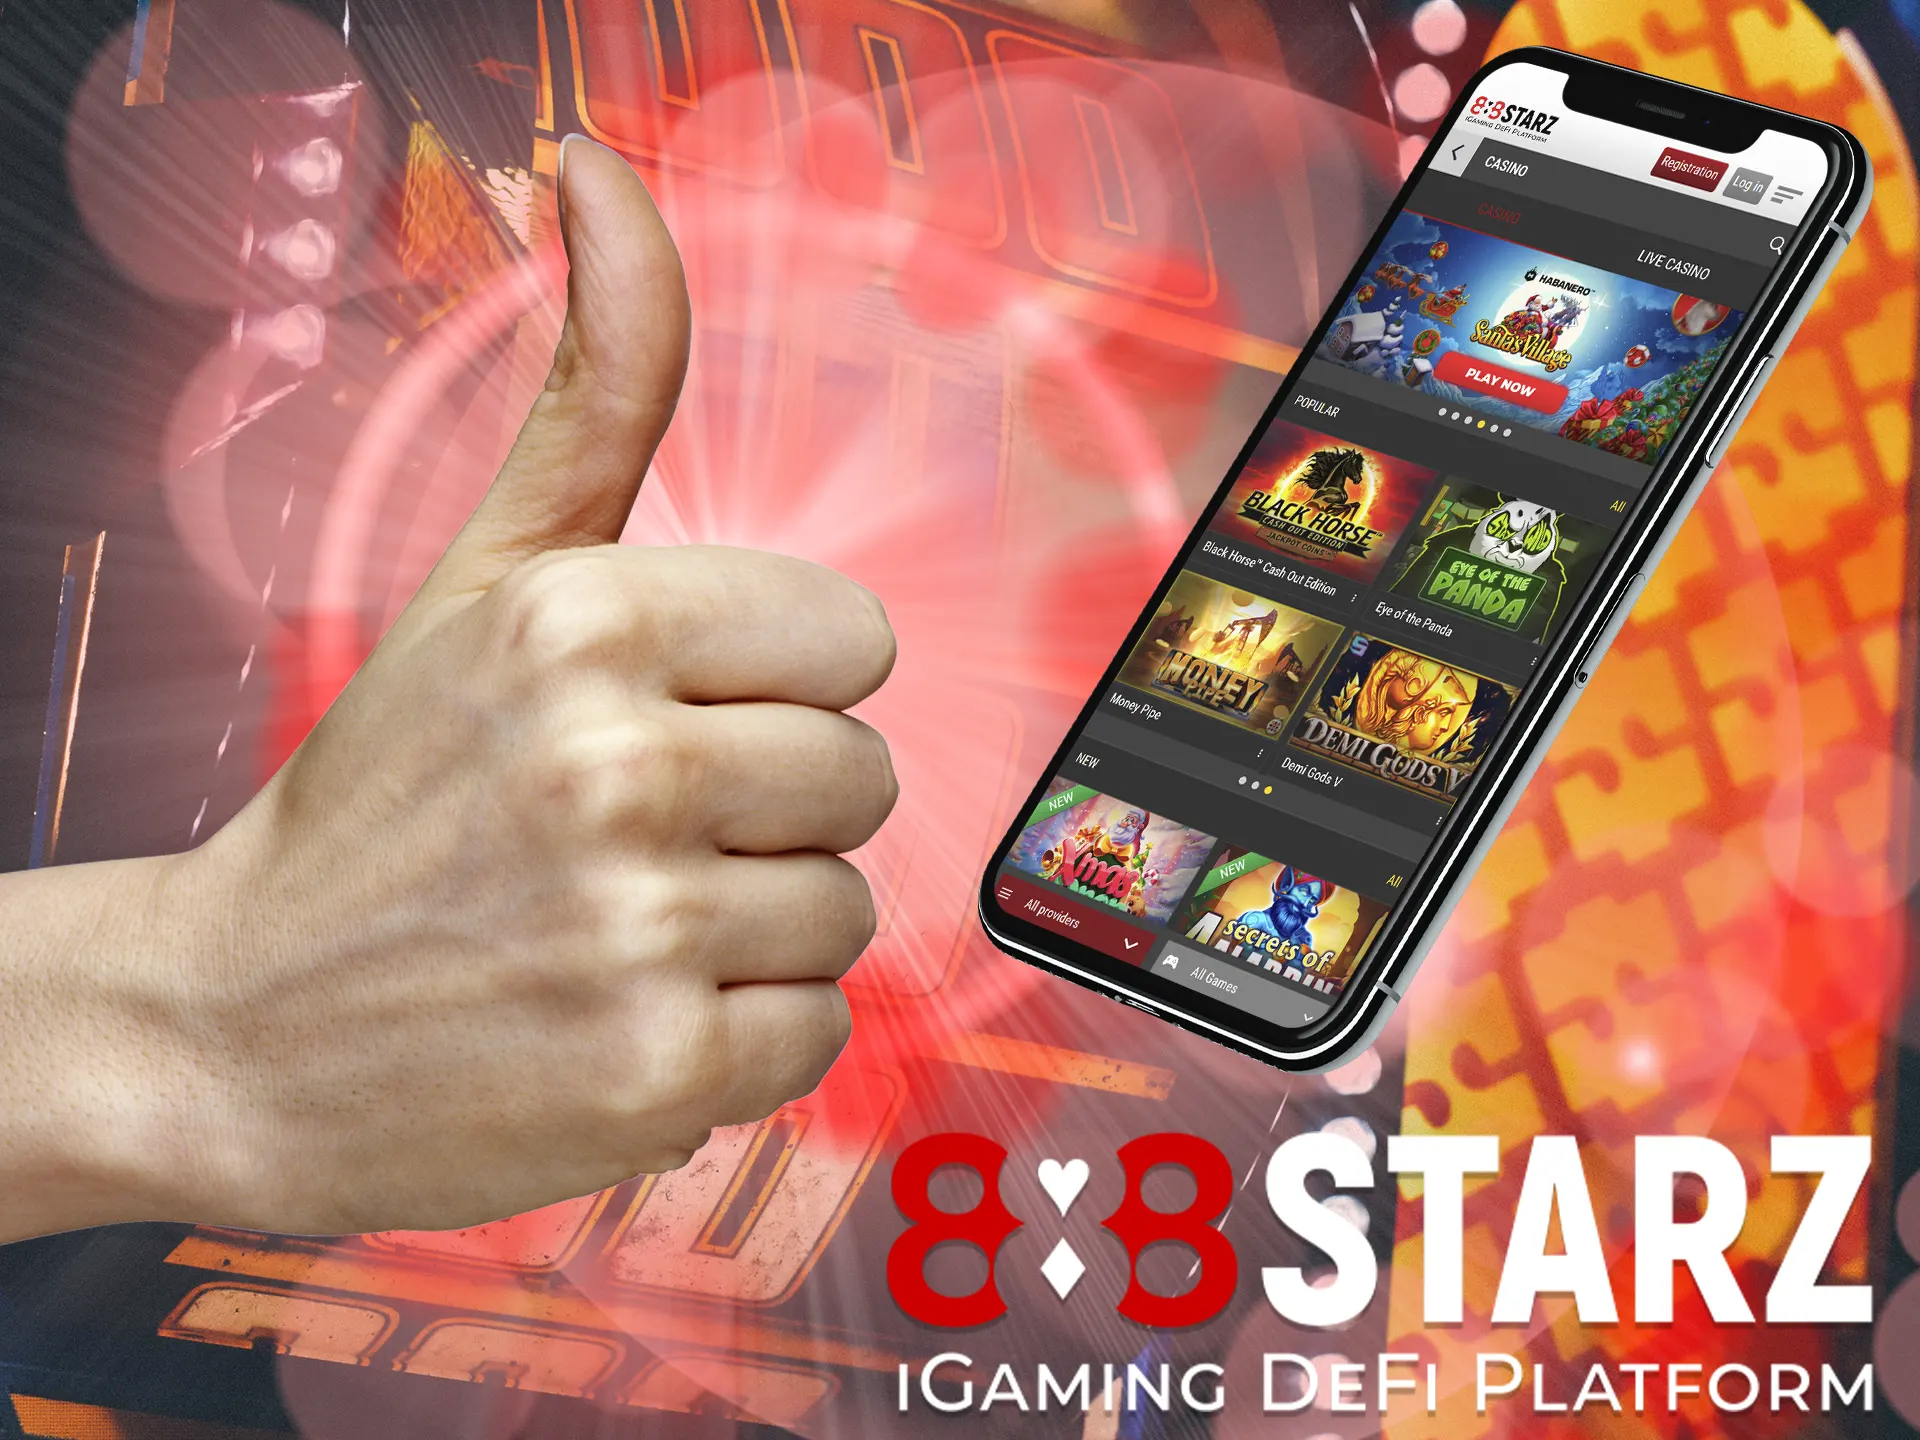 Bangladesh players have the chance to dive into the world of betting with their smartphone, thanks to the fast and secure 888starz app.